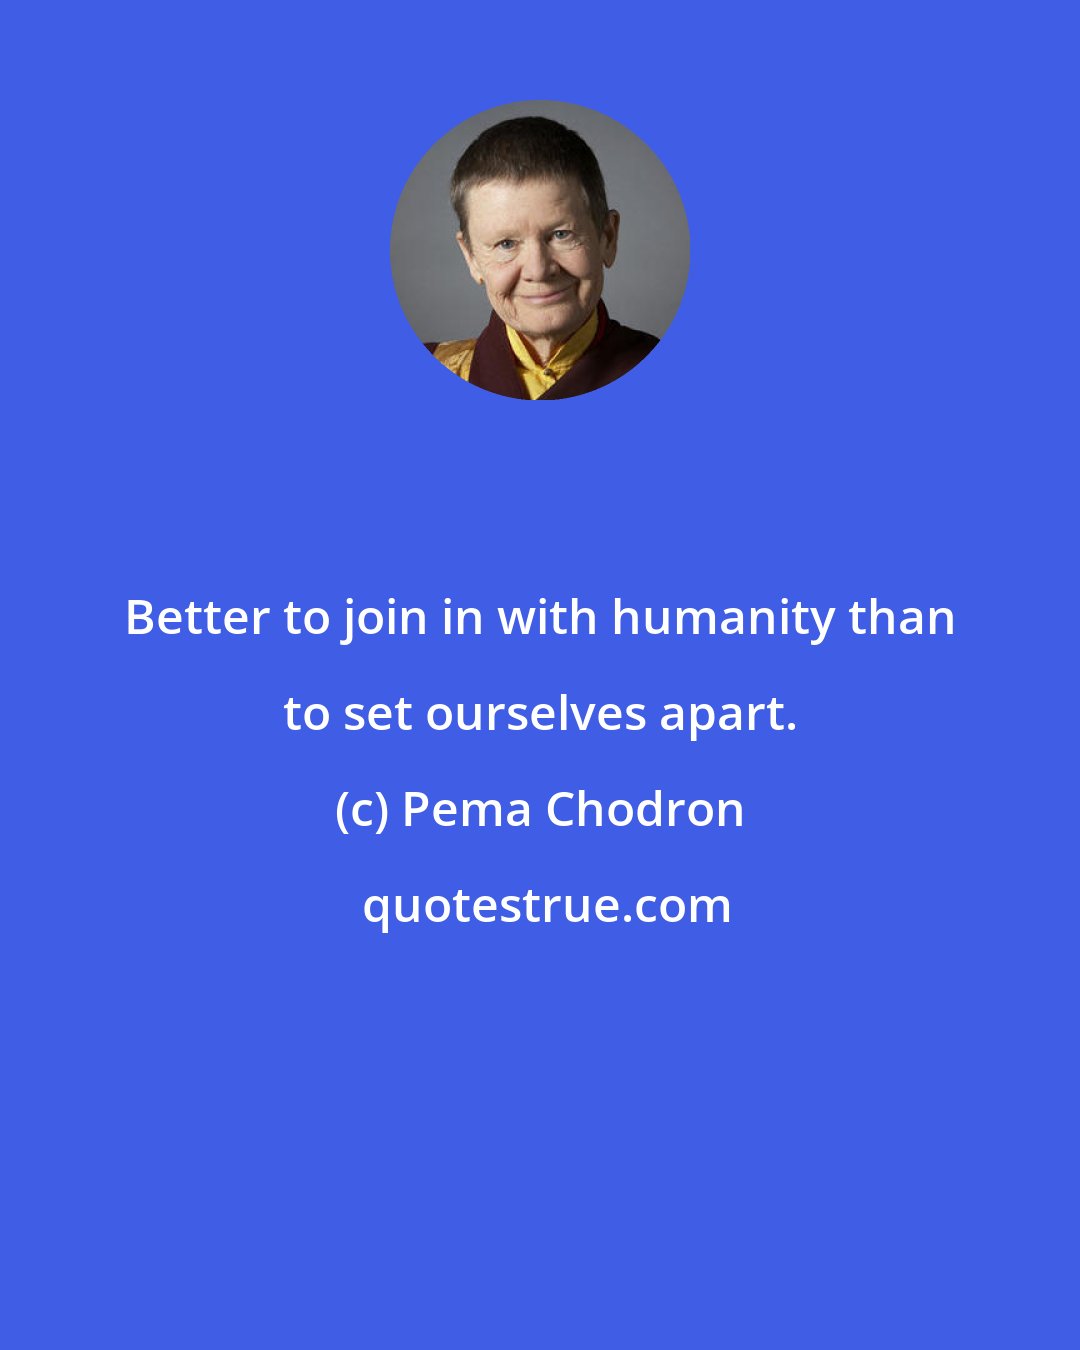 Pema Chodron: Better to join in with humanity than to set ourselves apart.